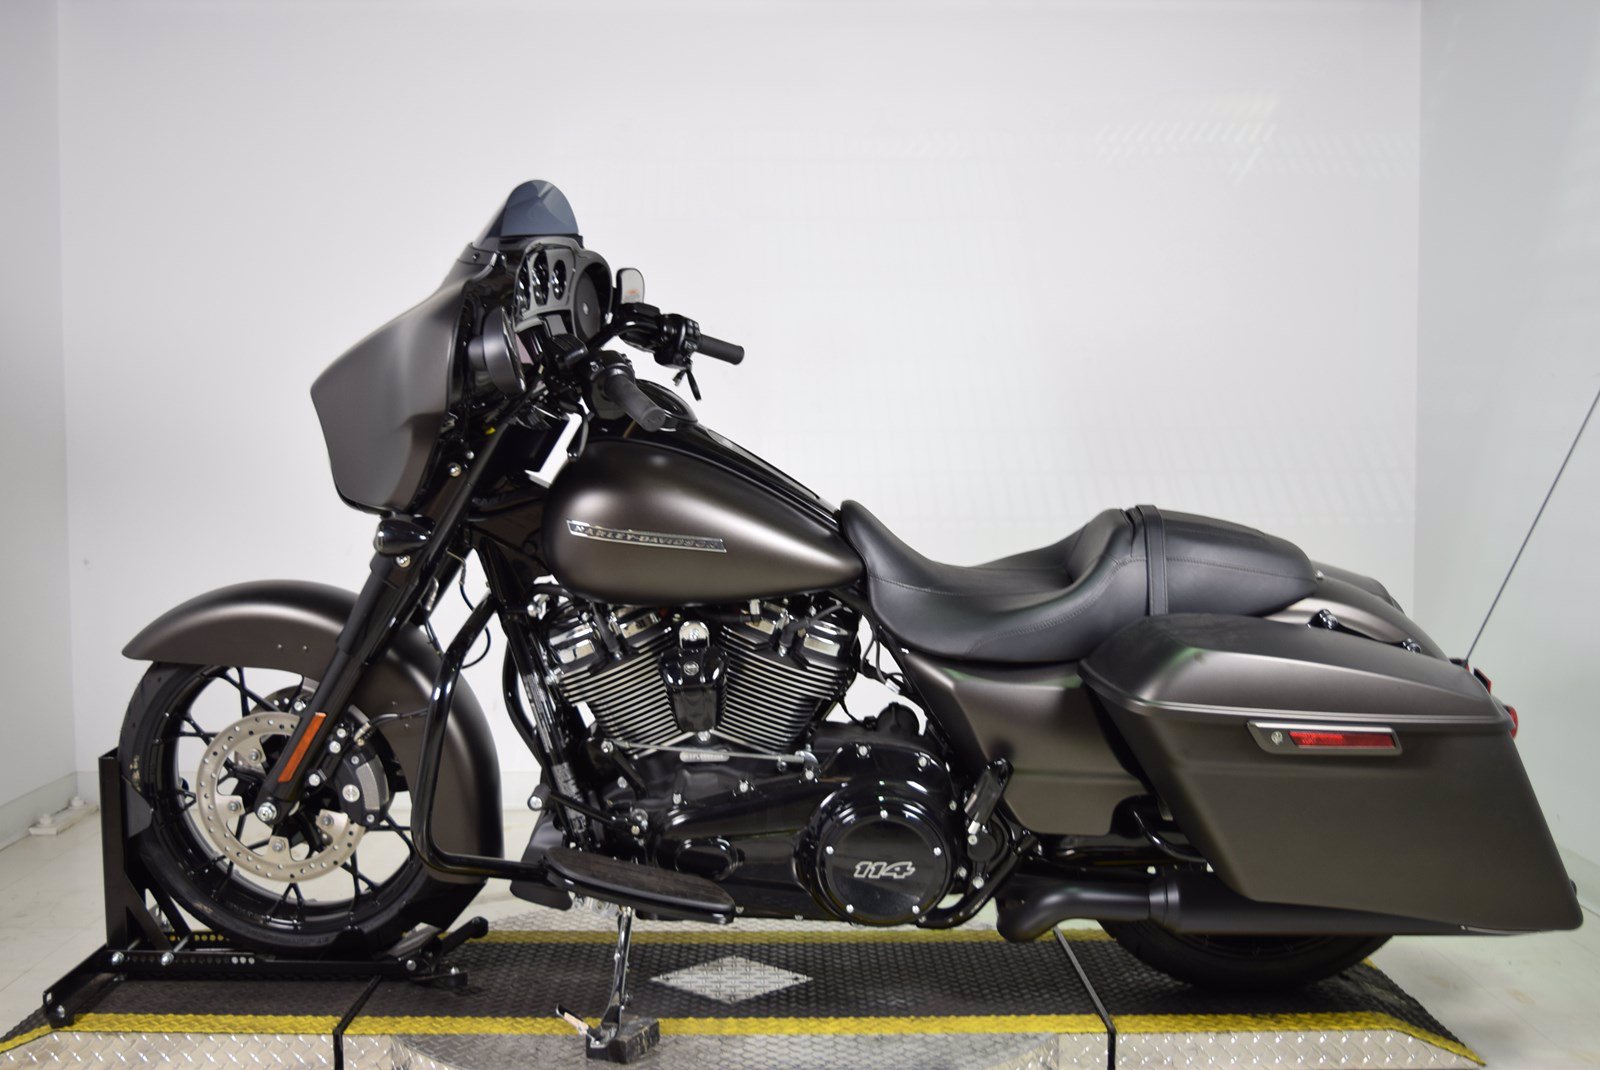 New 2020 Harley Davidson Street Glide Special FLHXS Touring in